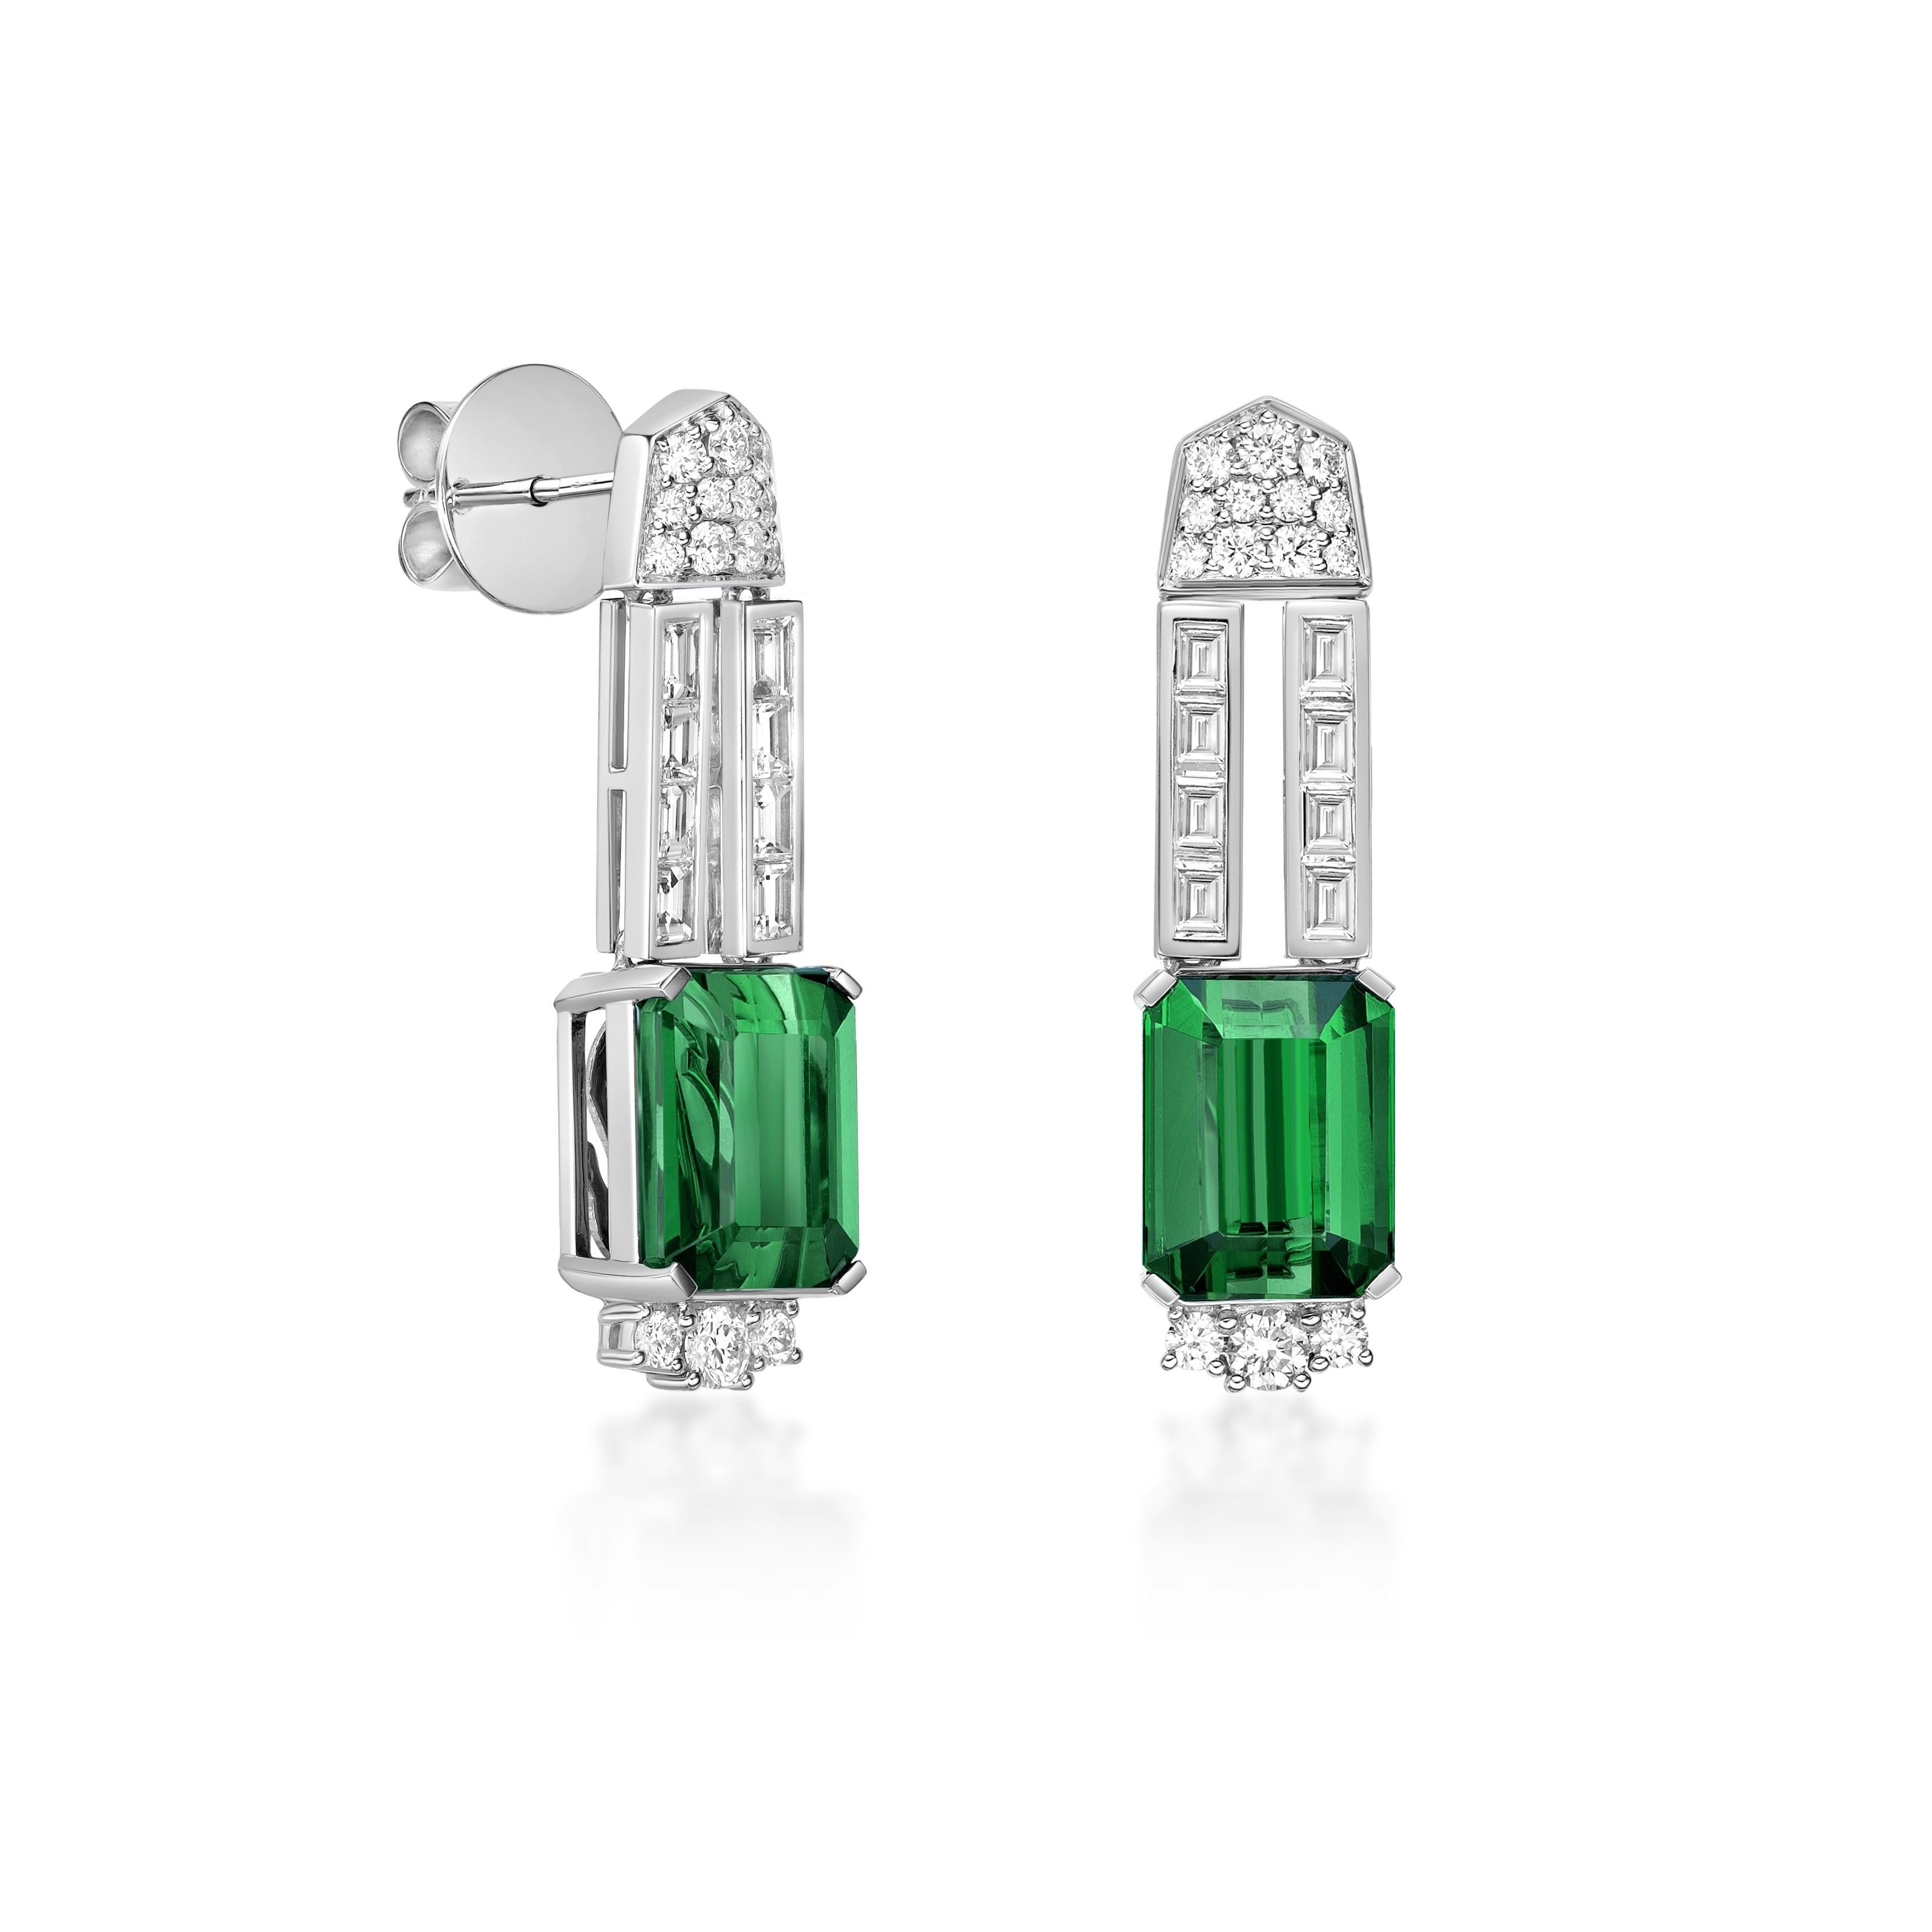 This collection features an array of Green Tourmaline with a Green hue that is as cool as it gets! Accented with diamonds these earrings are made in white gold and present a classic yet elegant look.

Green Tourmaline Drop Earrings in 18 Karat White